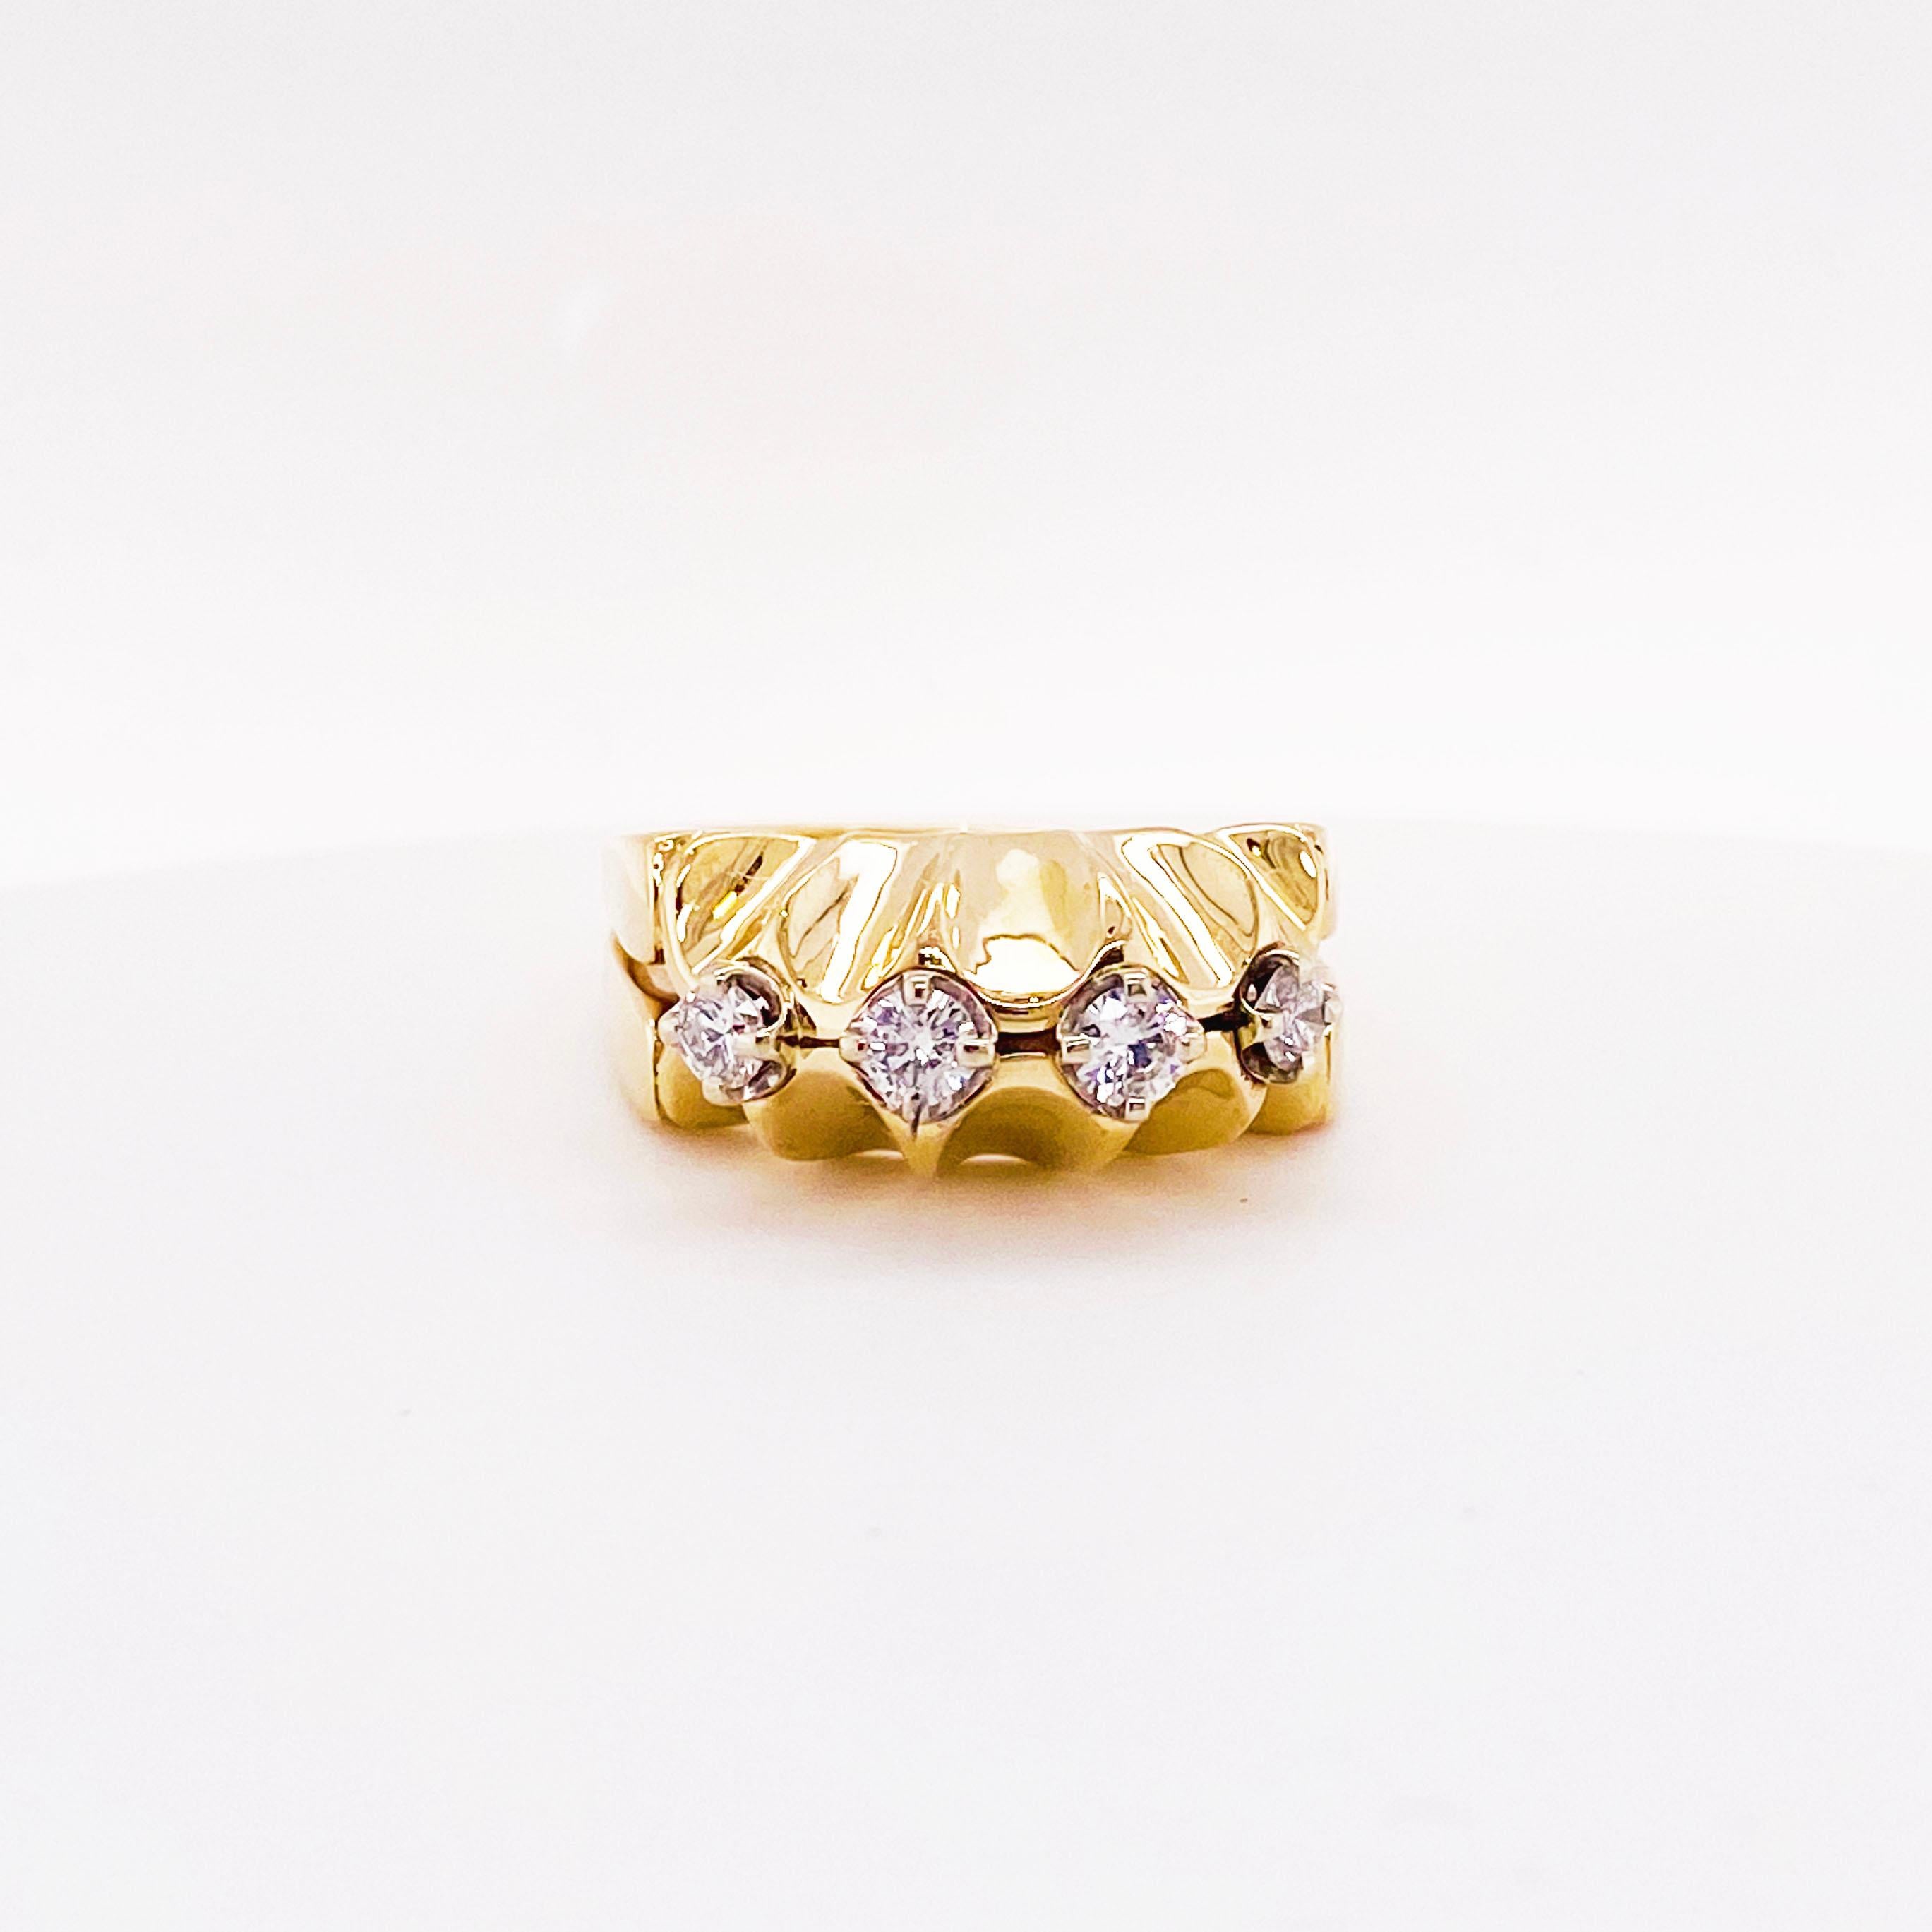 This diamond ring is amazing with a starburst of four diamonds. This 14 karat yellow gold ring is nice and heavy with four equal size diamonds that are .10 carat each and set in 14 karat white gold prongs for security and to help reflect the white